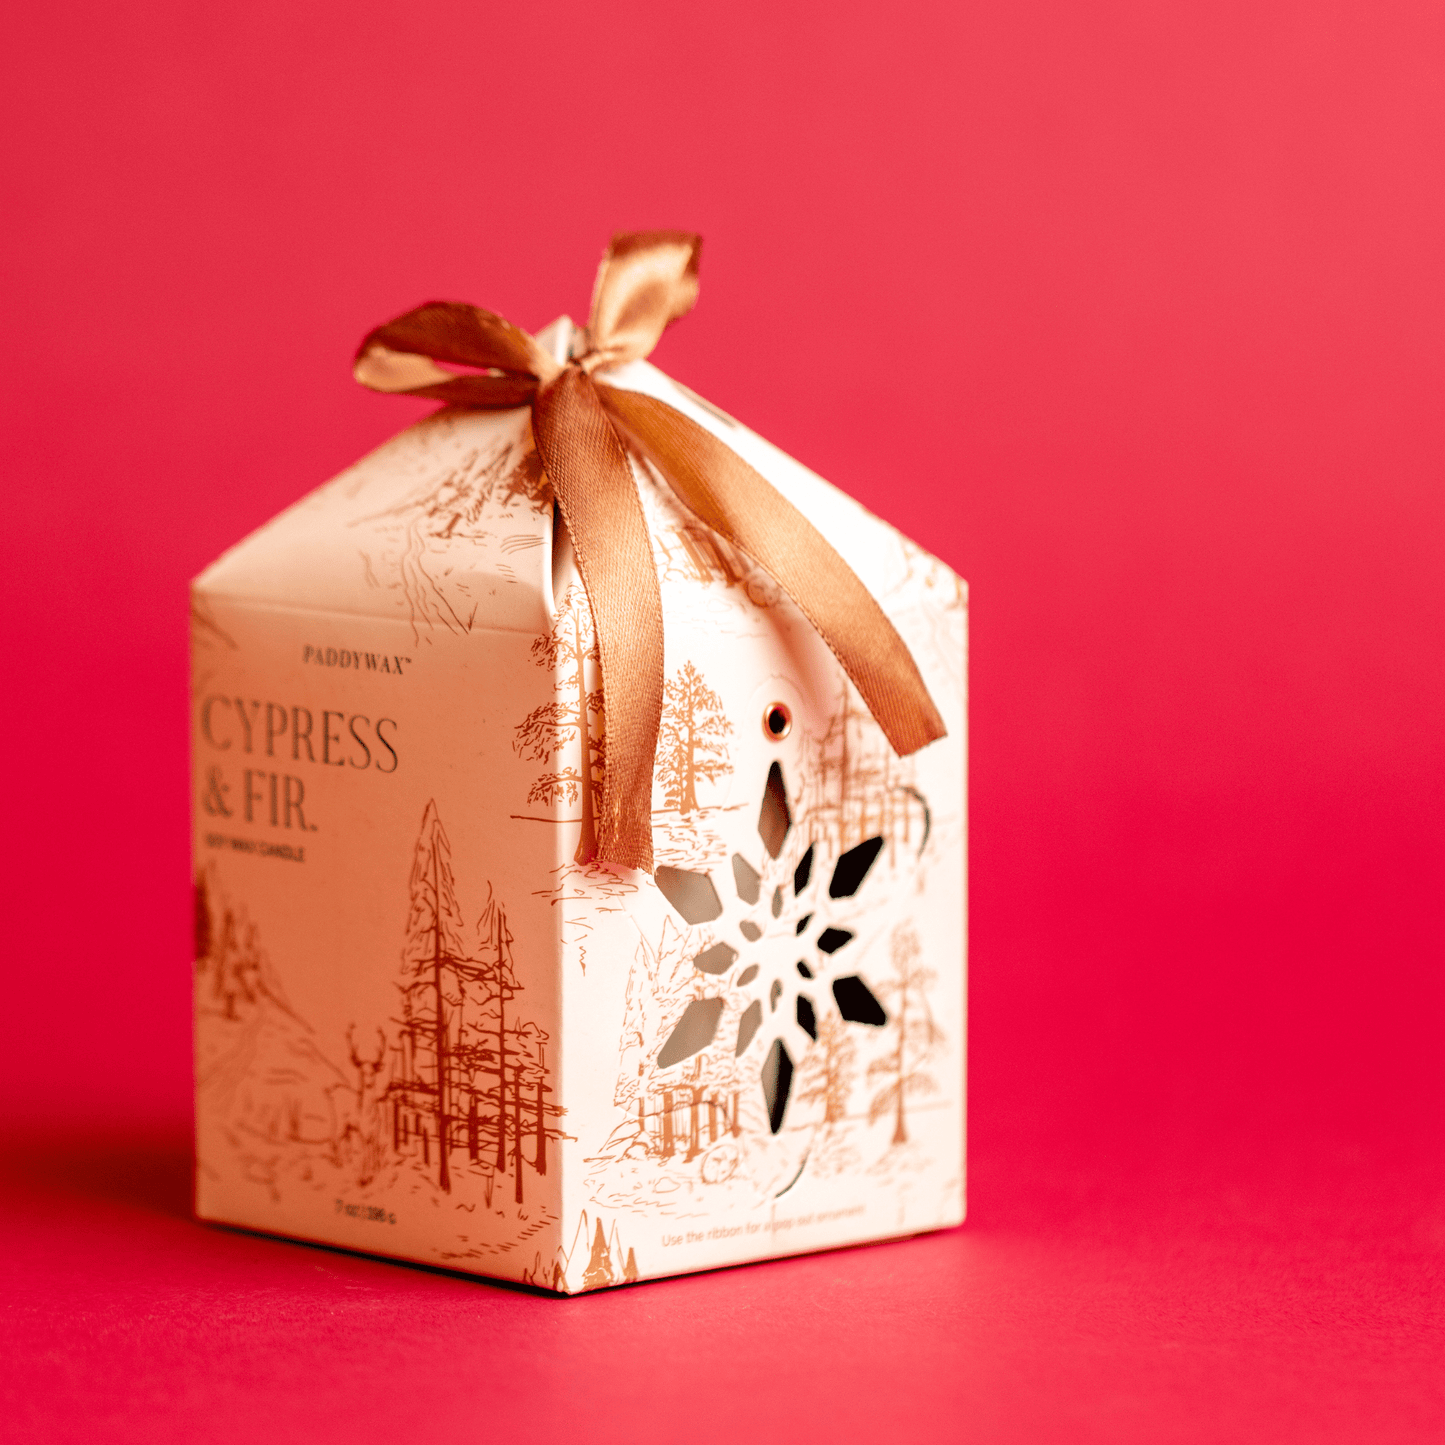 Ornament gift box on red background